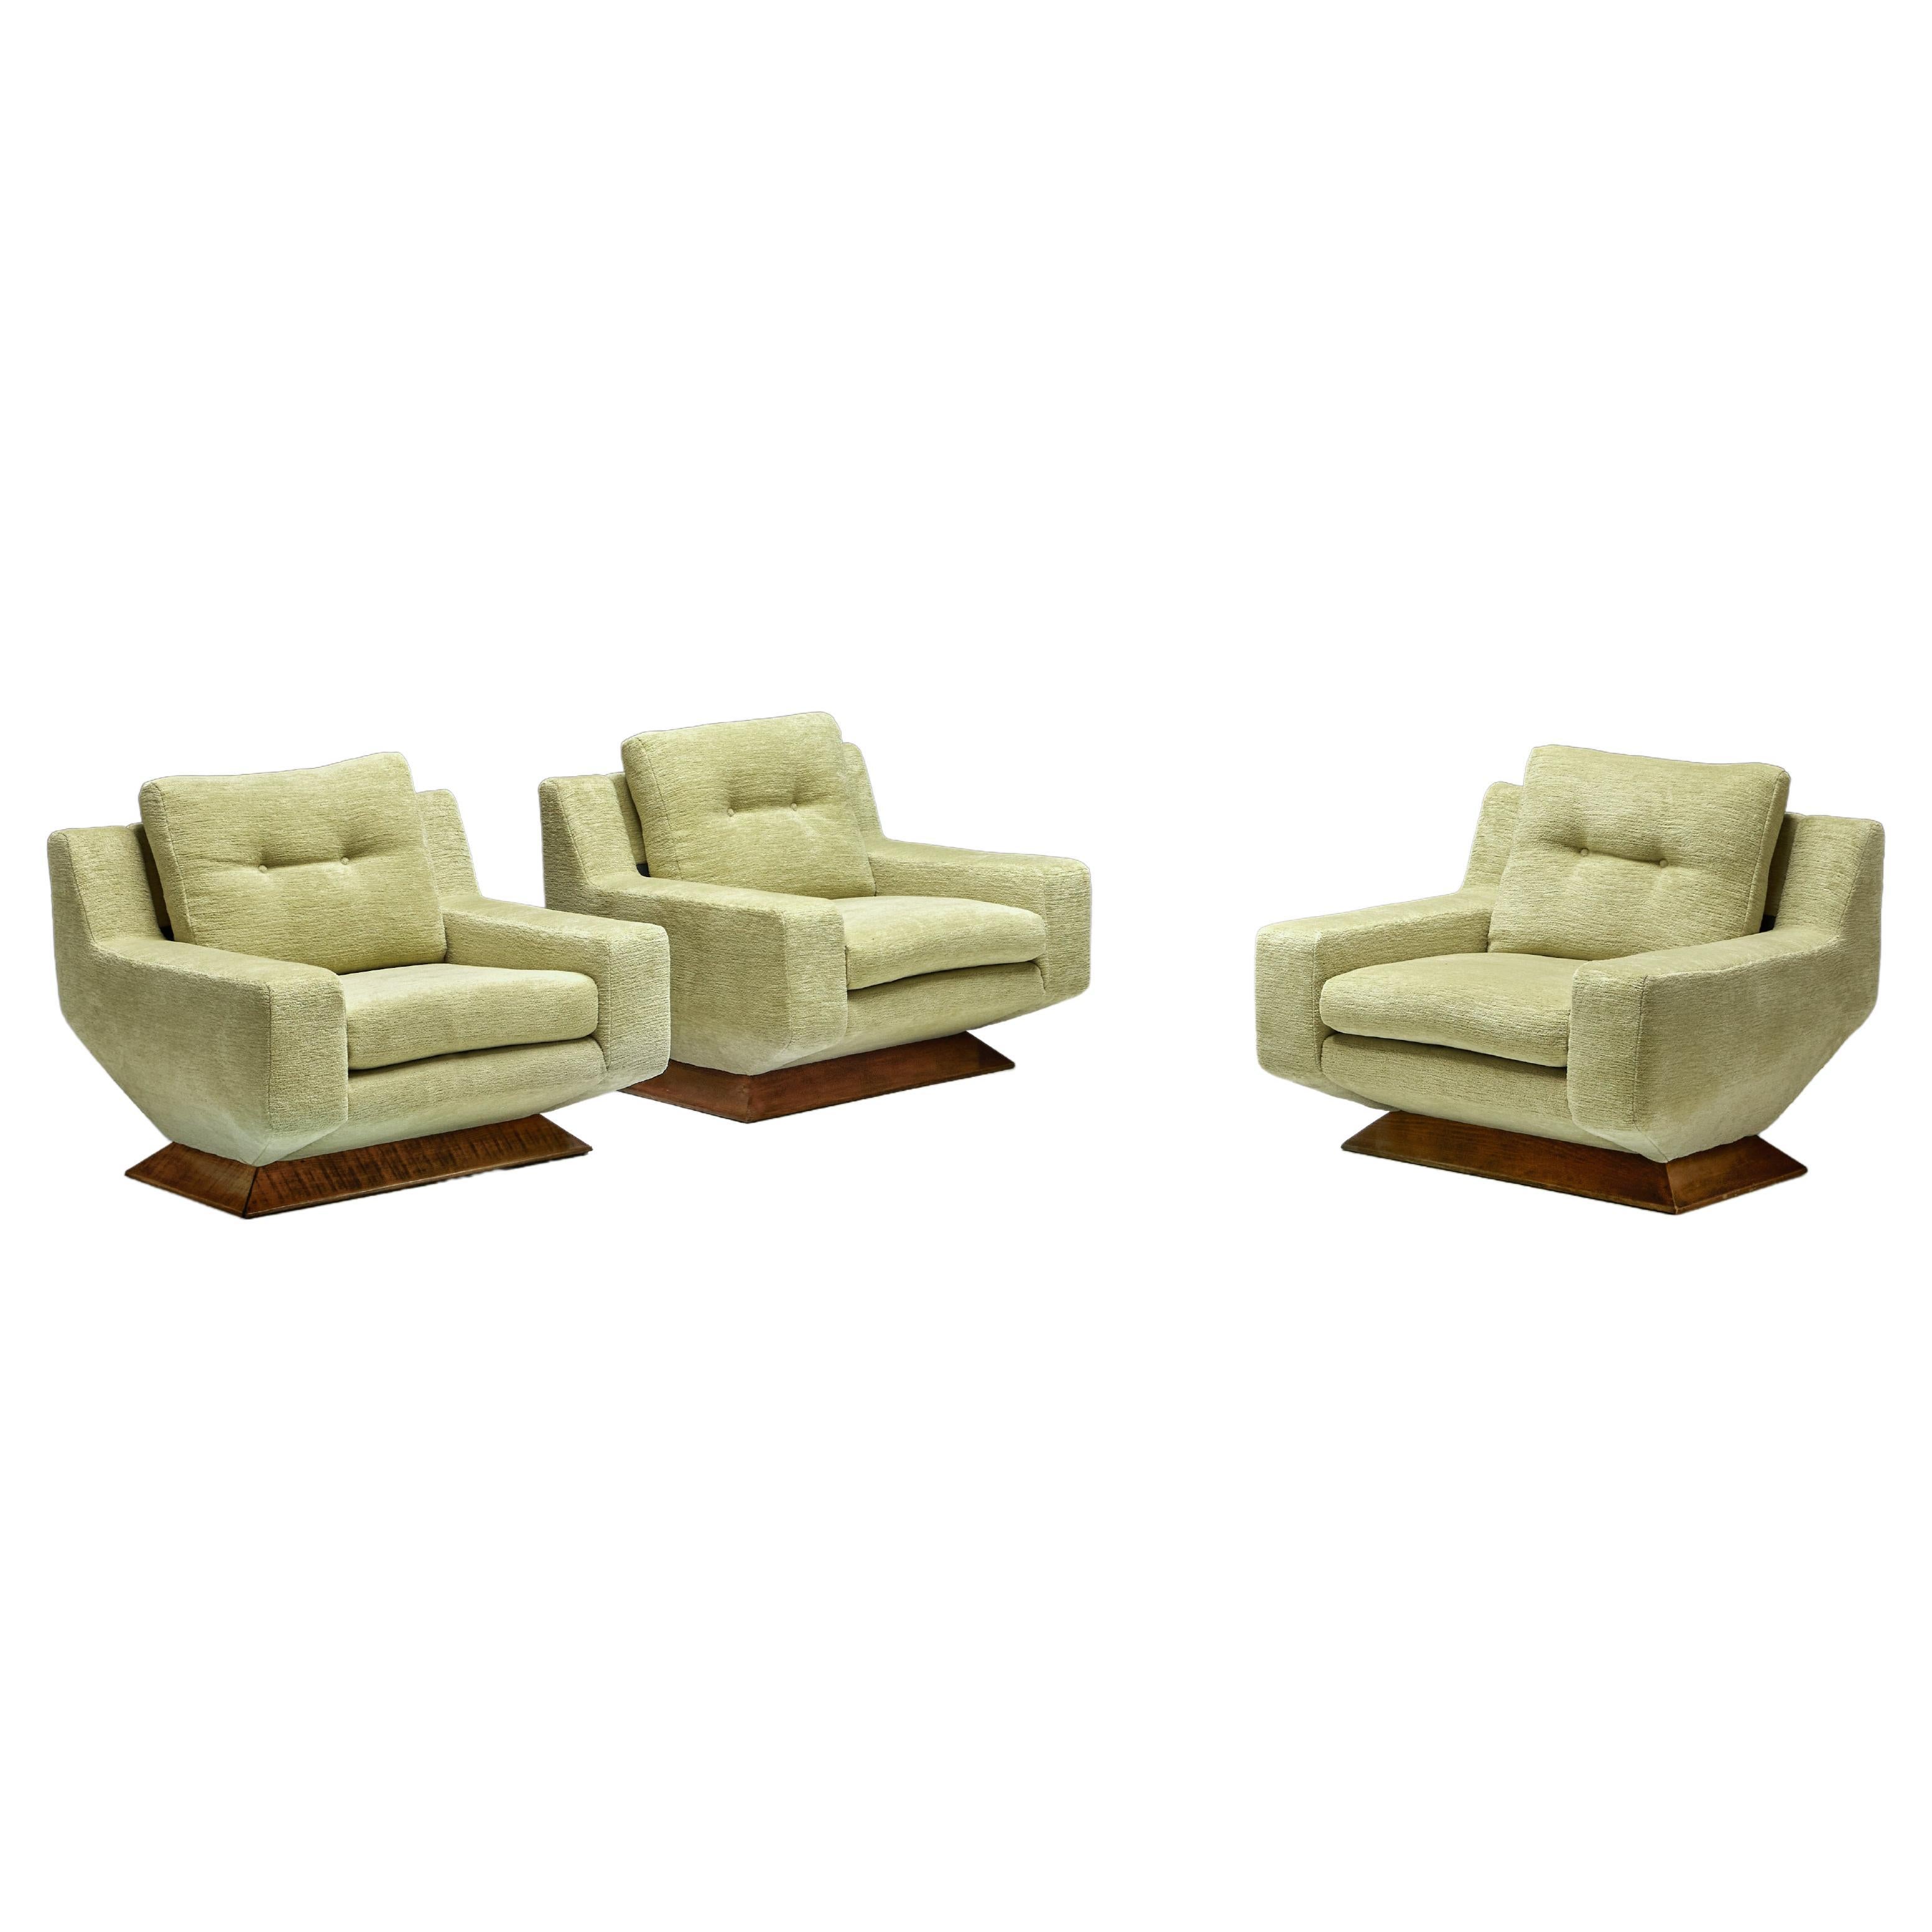 Mid-Century Club Chairs in Pierre Frey Chenille, Italy, 1960s For Sale